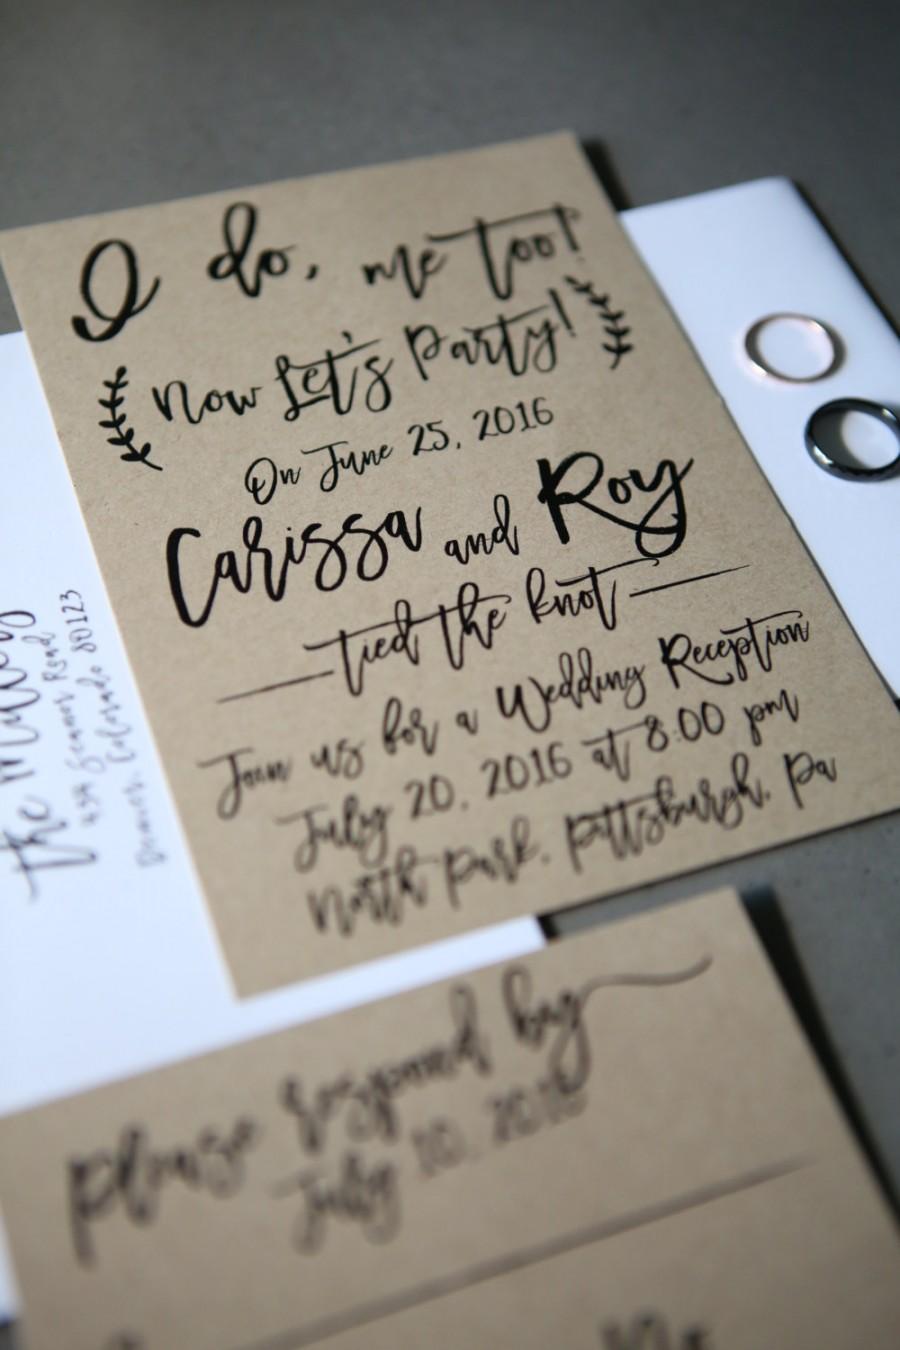 Wedding - I do, me too, Now Let's Party! Elopement, Wedding Announcement, Post-Wedding Reception invitation + RSVP card, Kraft Paper, calligraphy